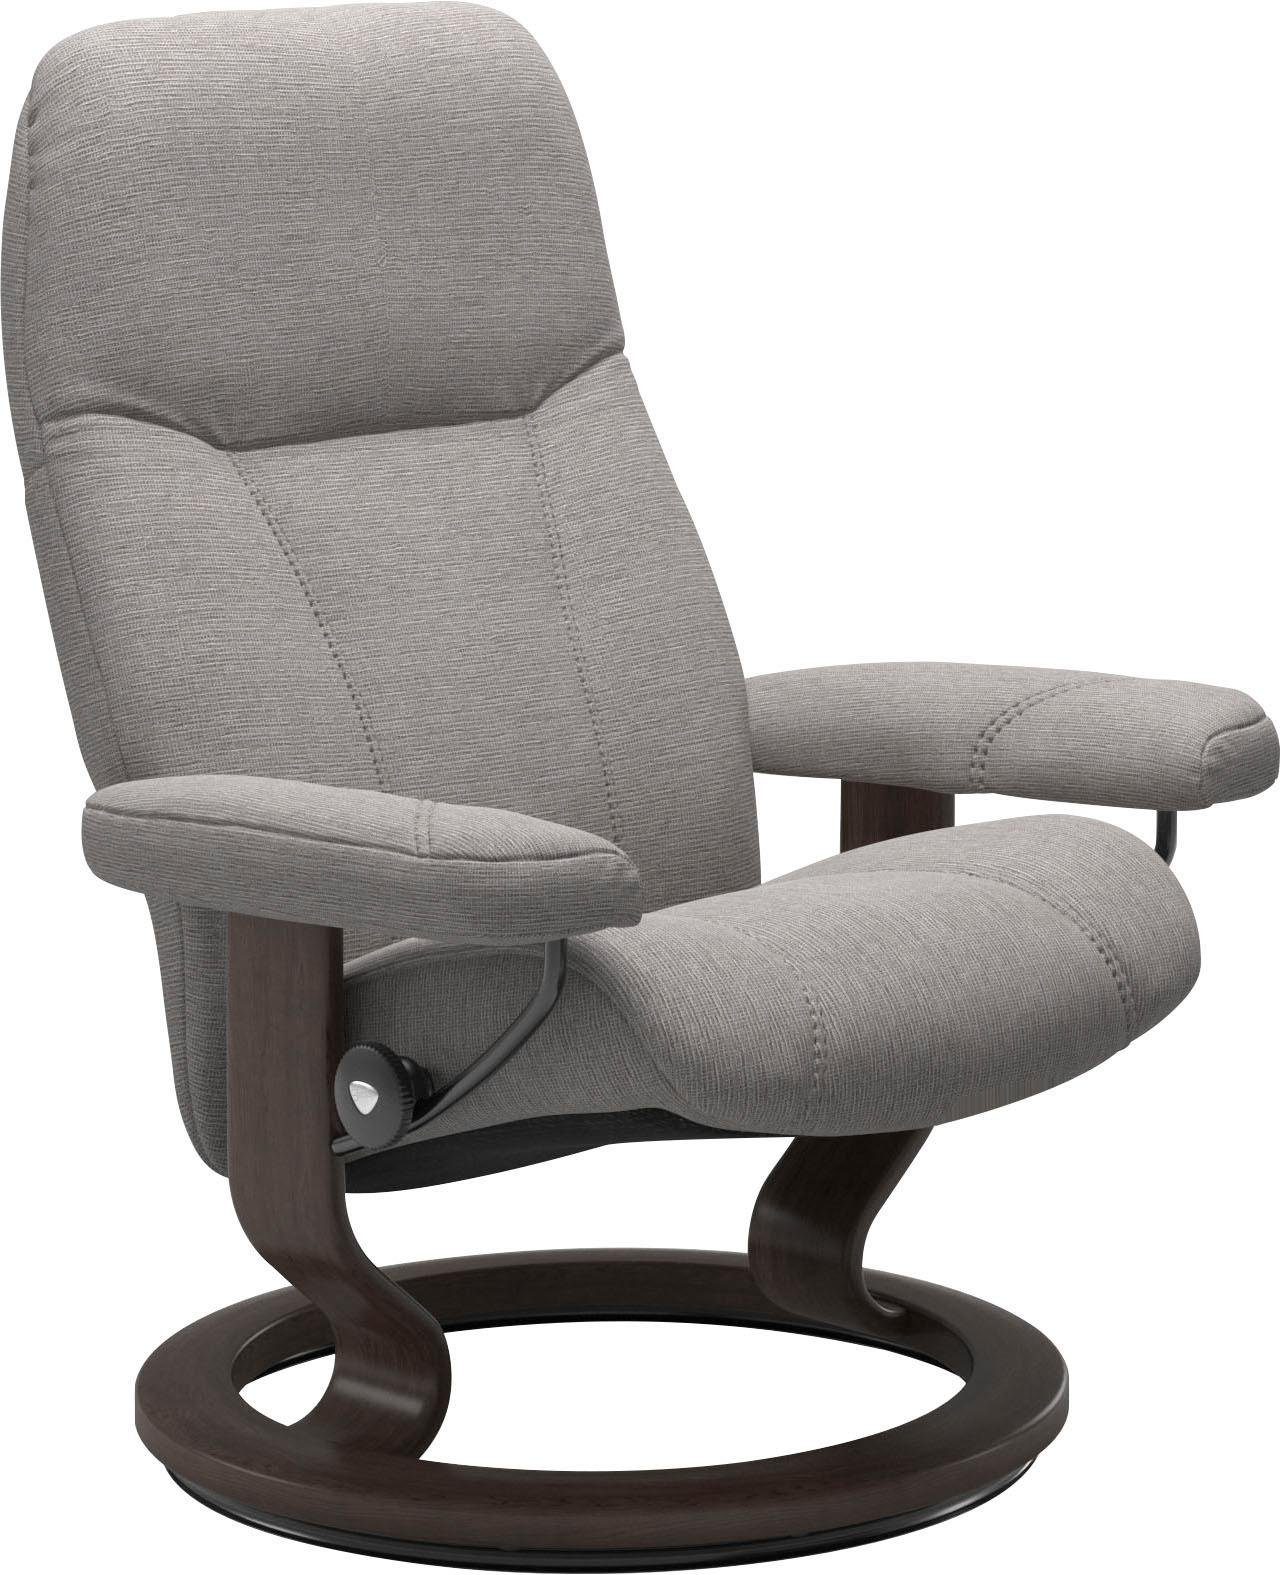 Base, Wenge S, Classic Gestell Consul, Stressless® Relaxsessel Größe mit